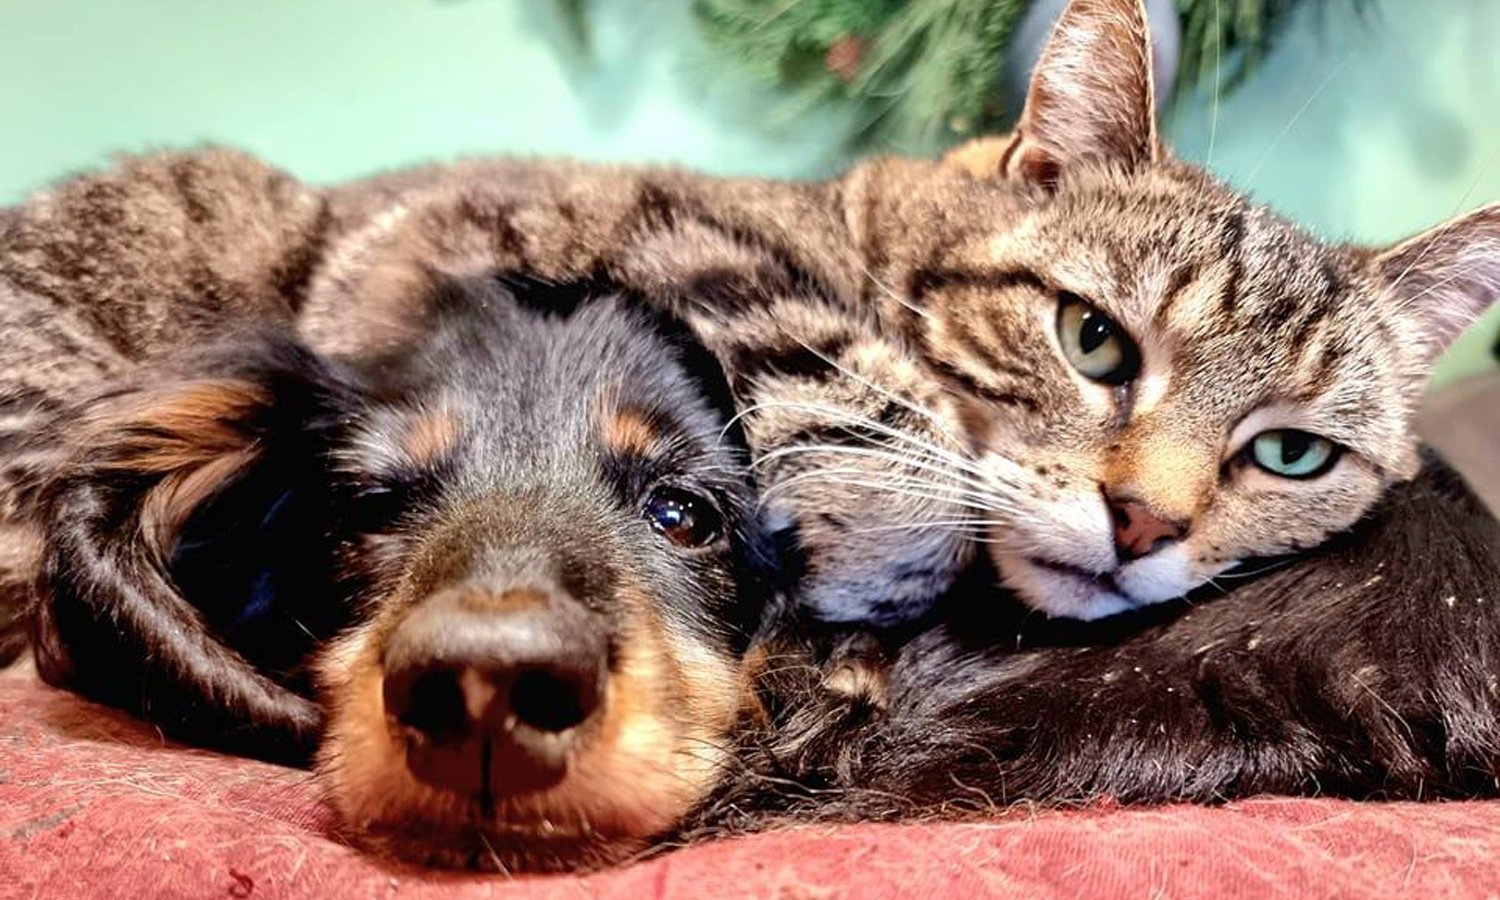 Adorable multicoloured kitty laying on top of a black and brown Dachshund